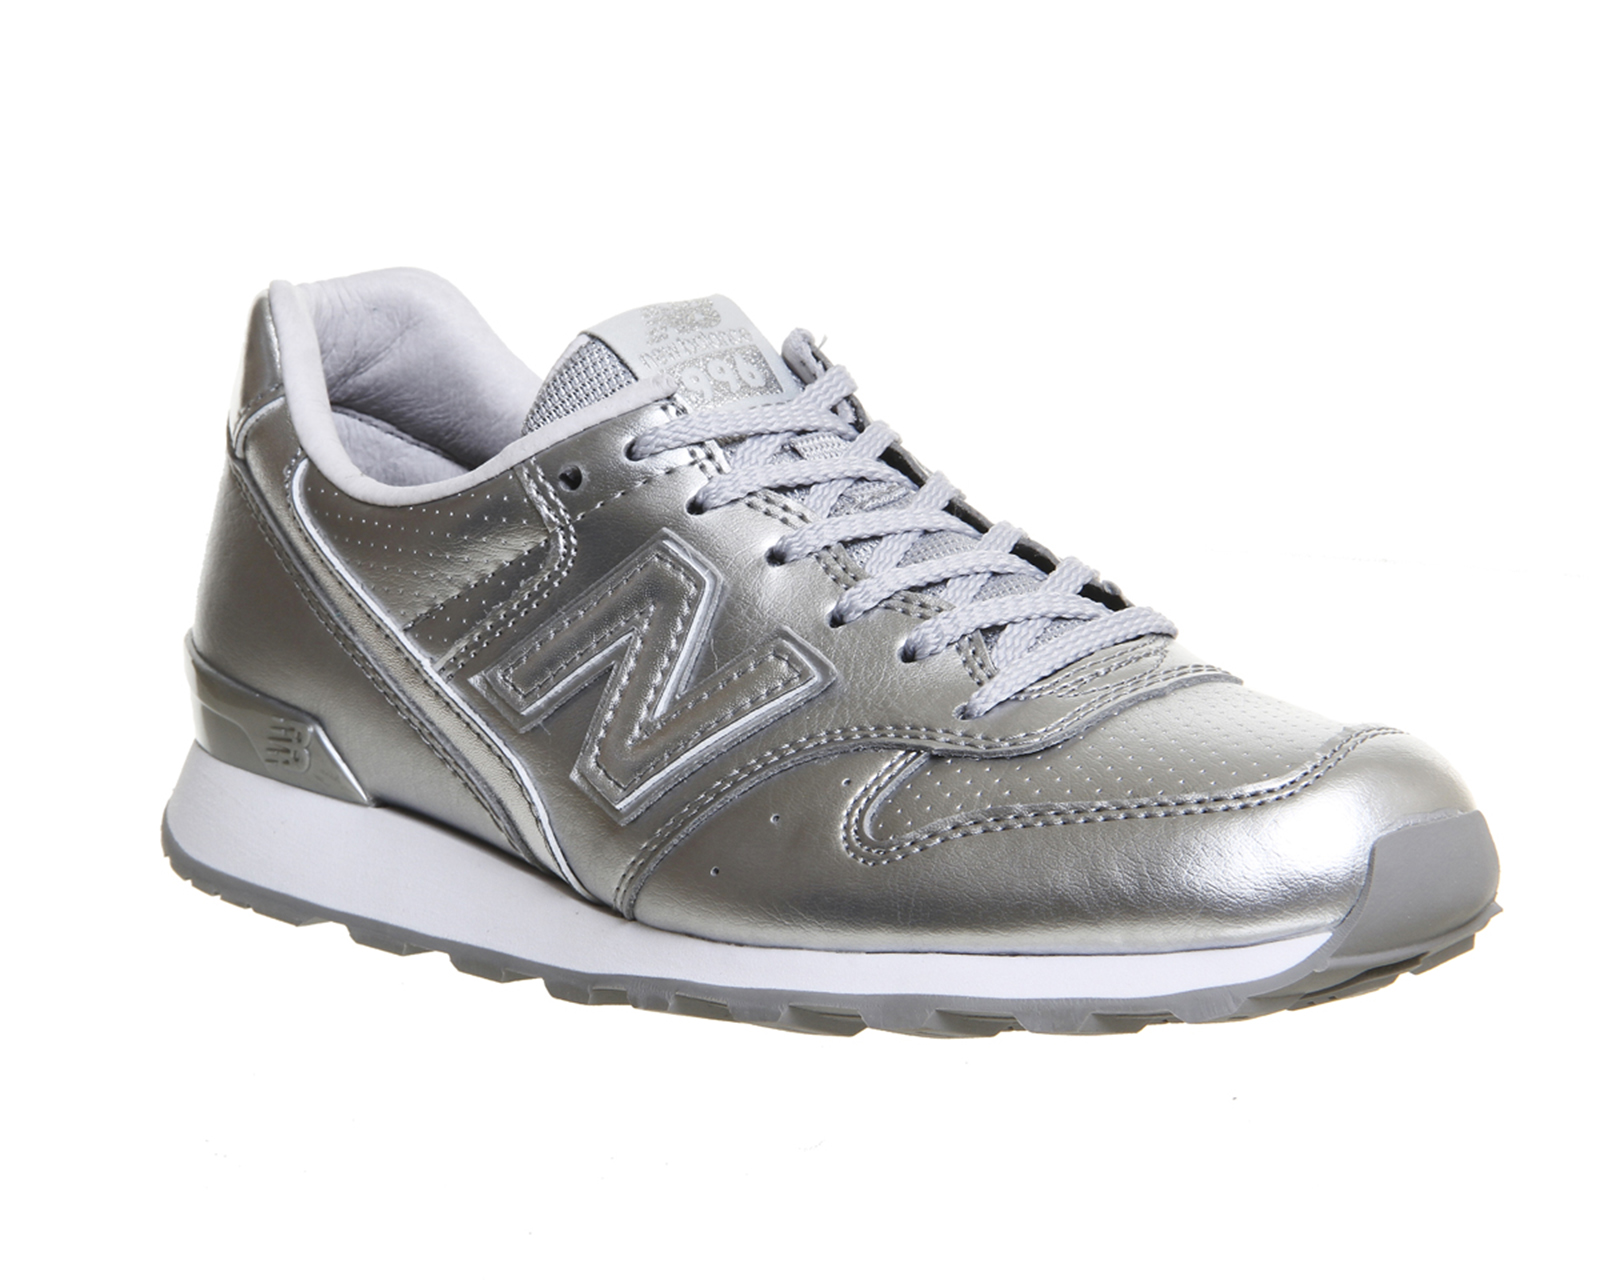 New Balance 996 Silver Mono - Hers Exclusives